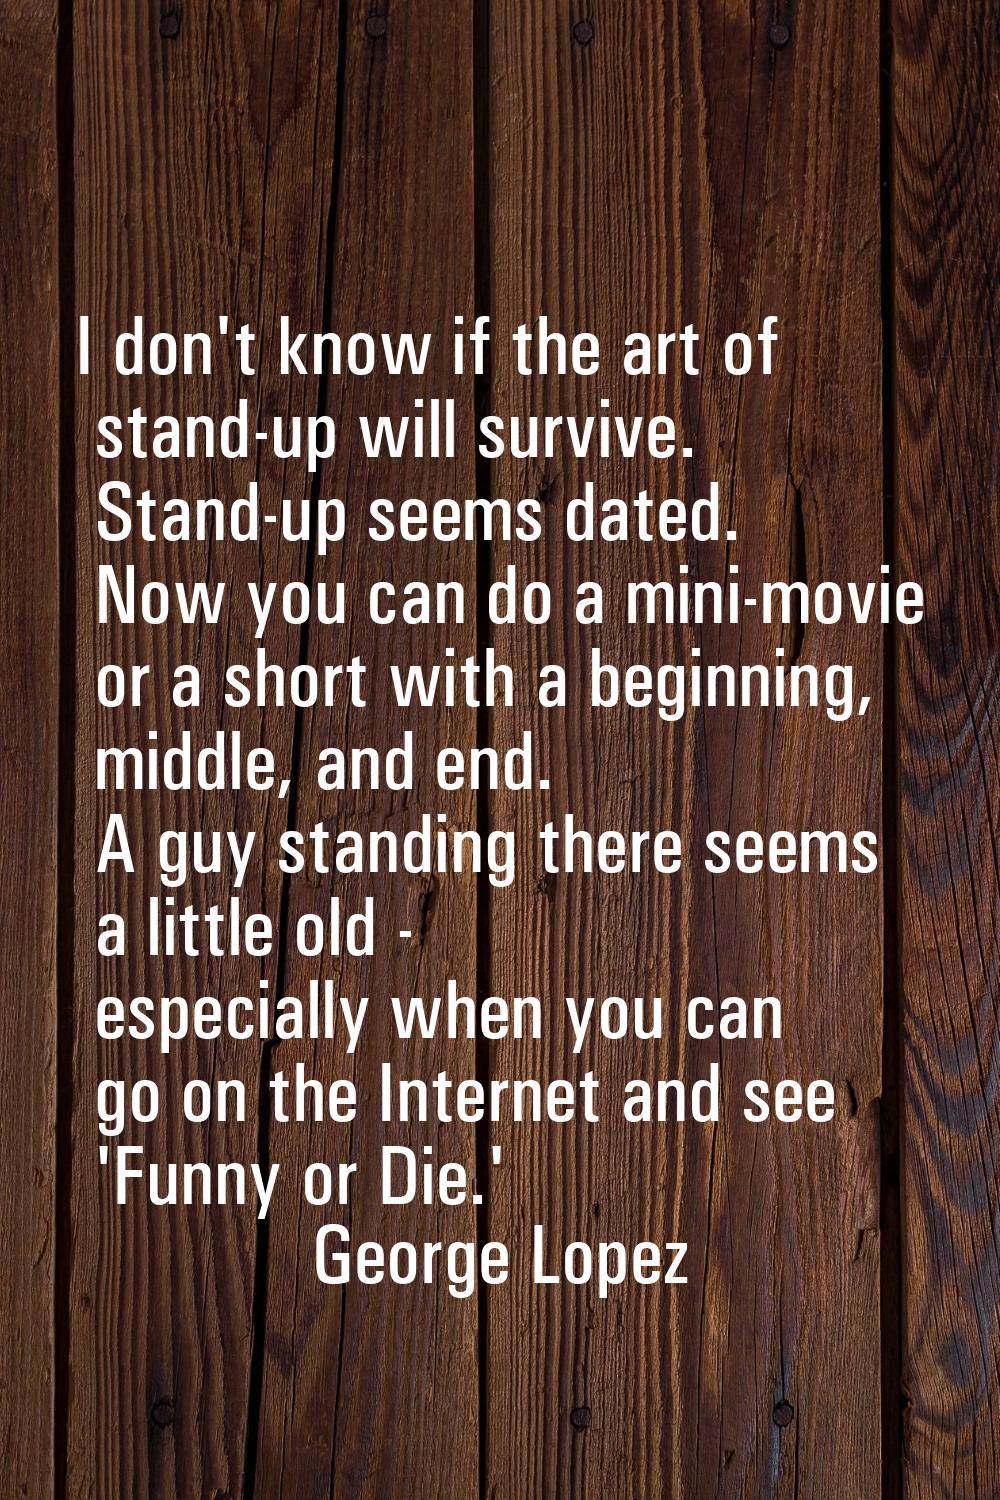 I don't know if the art of stand-up will survive. Stand-up seems dated. Now you can do a mini-movie